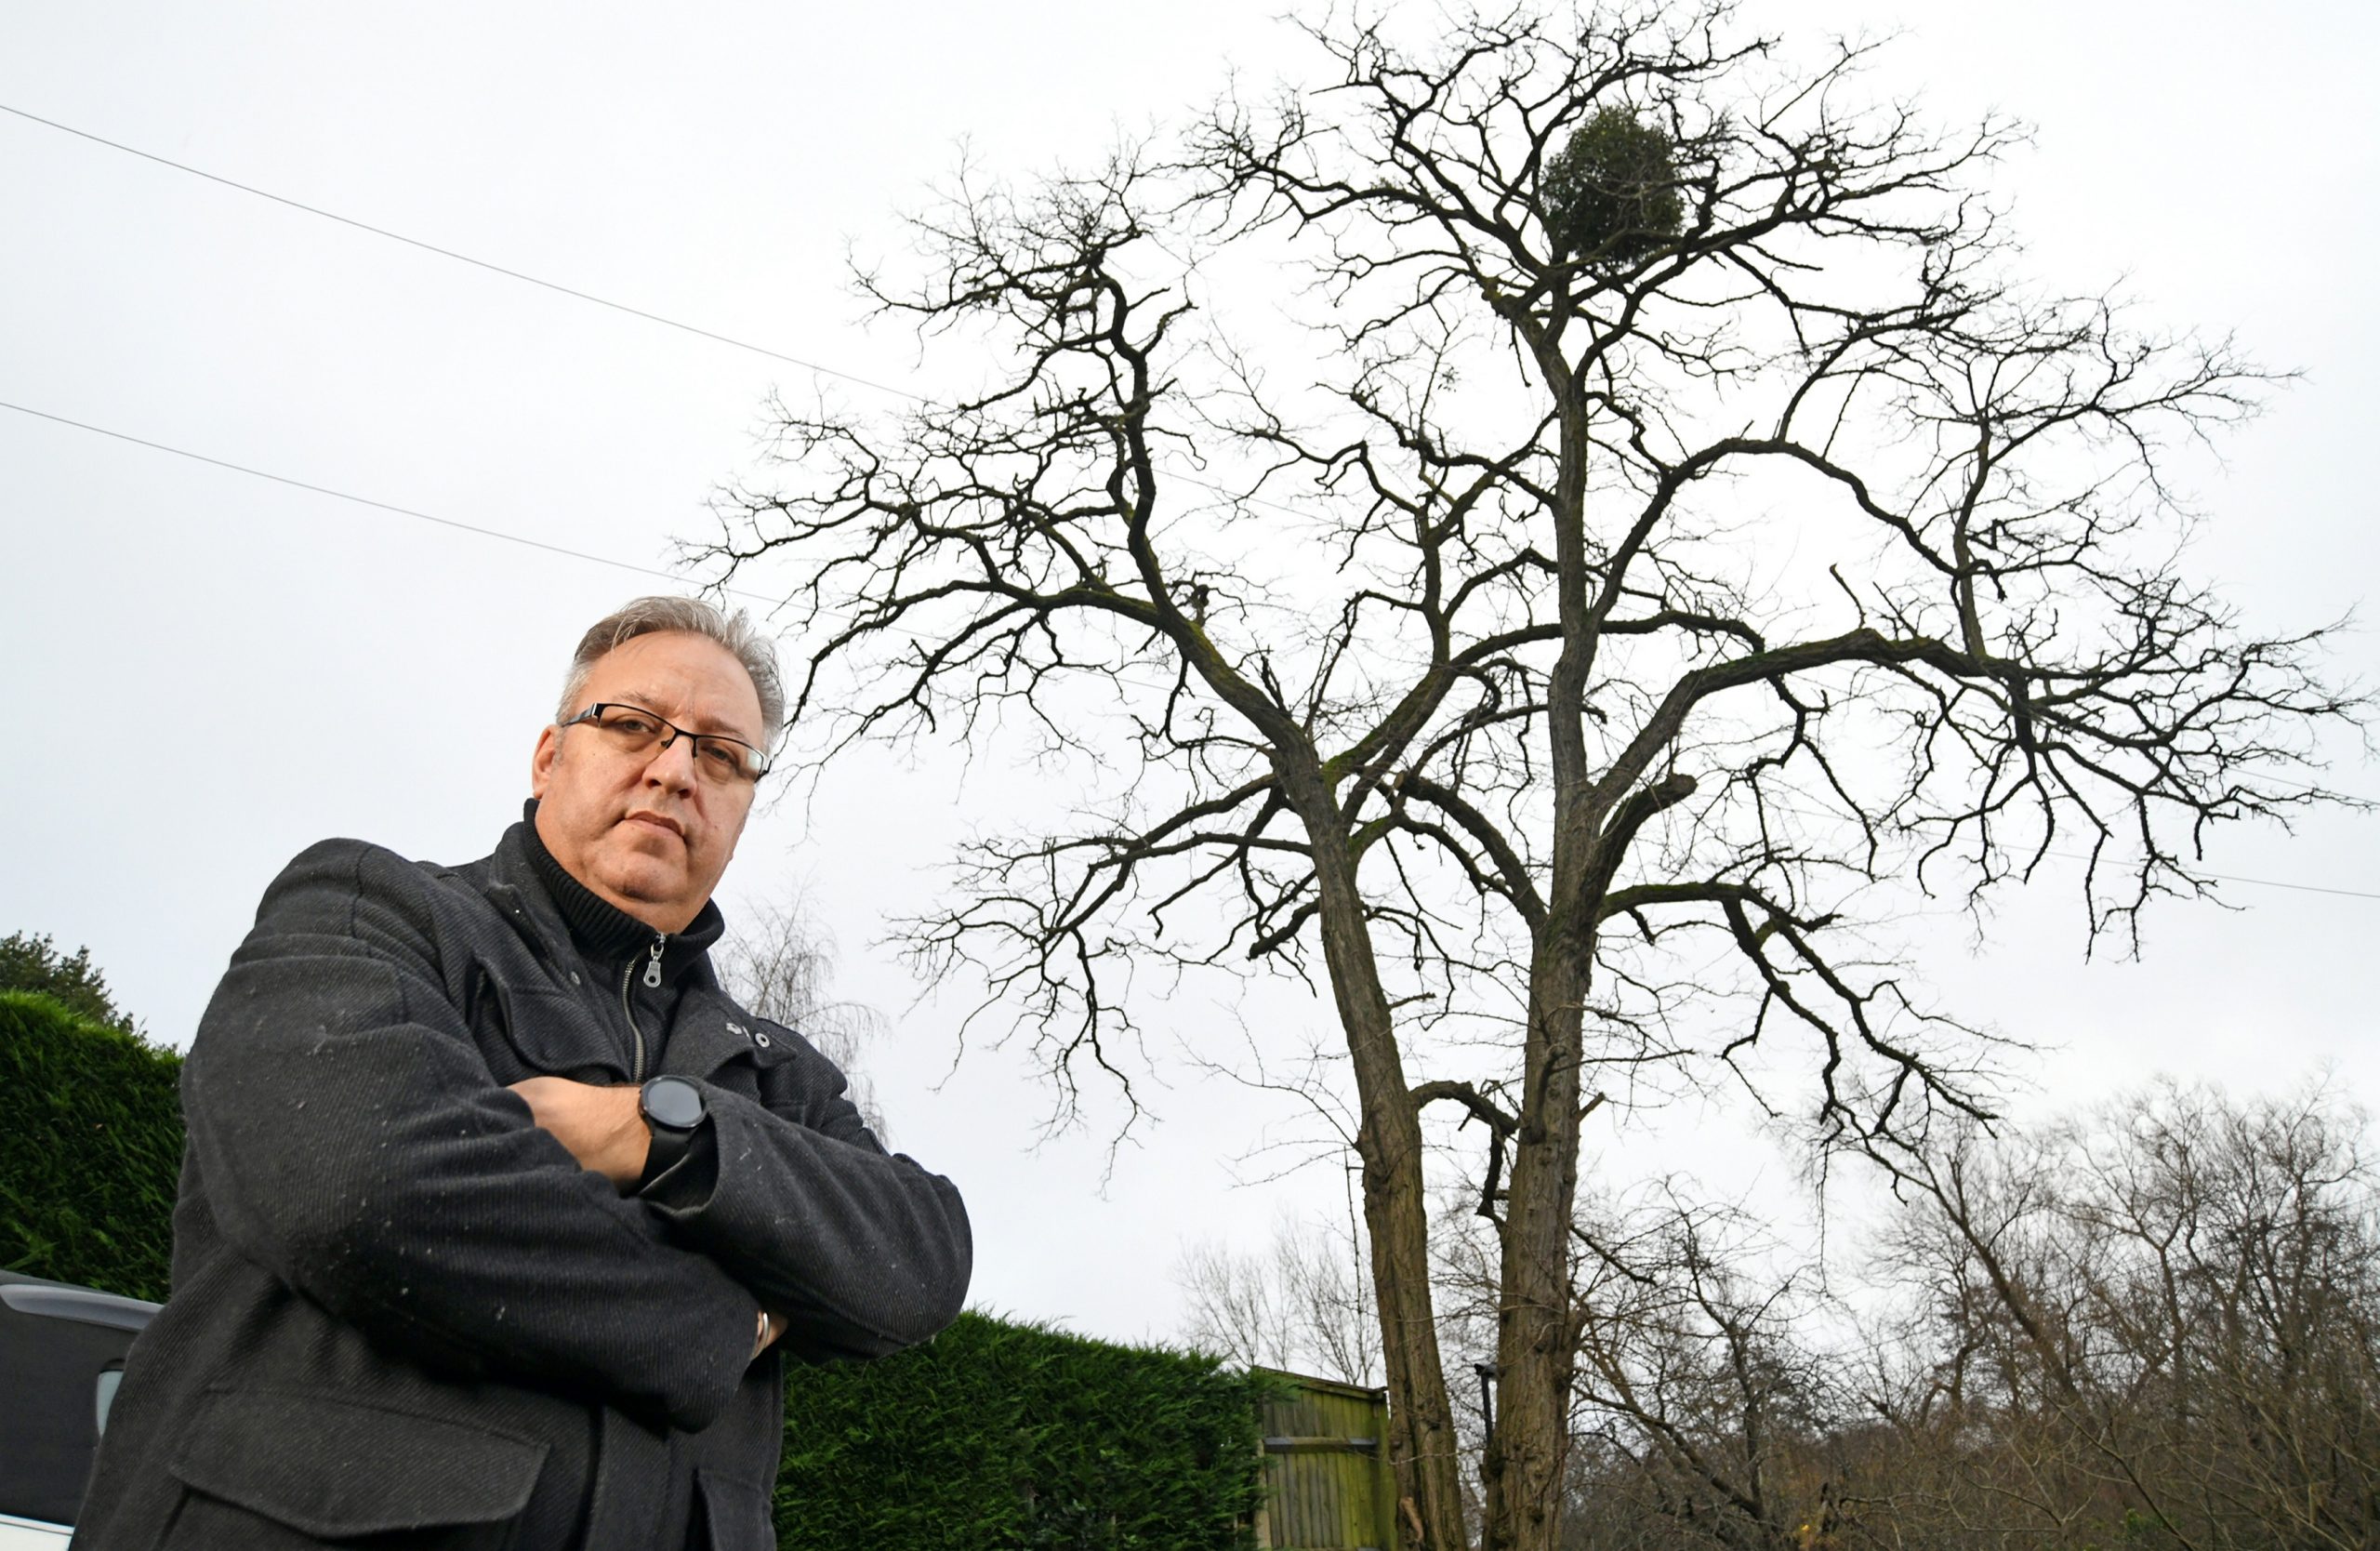 We saved £3k to finally chop down 14m tree on our front drive – only for our neighbour to report us to council & stop us